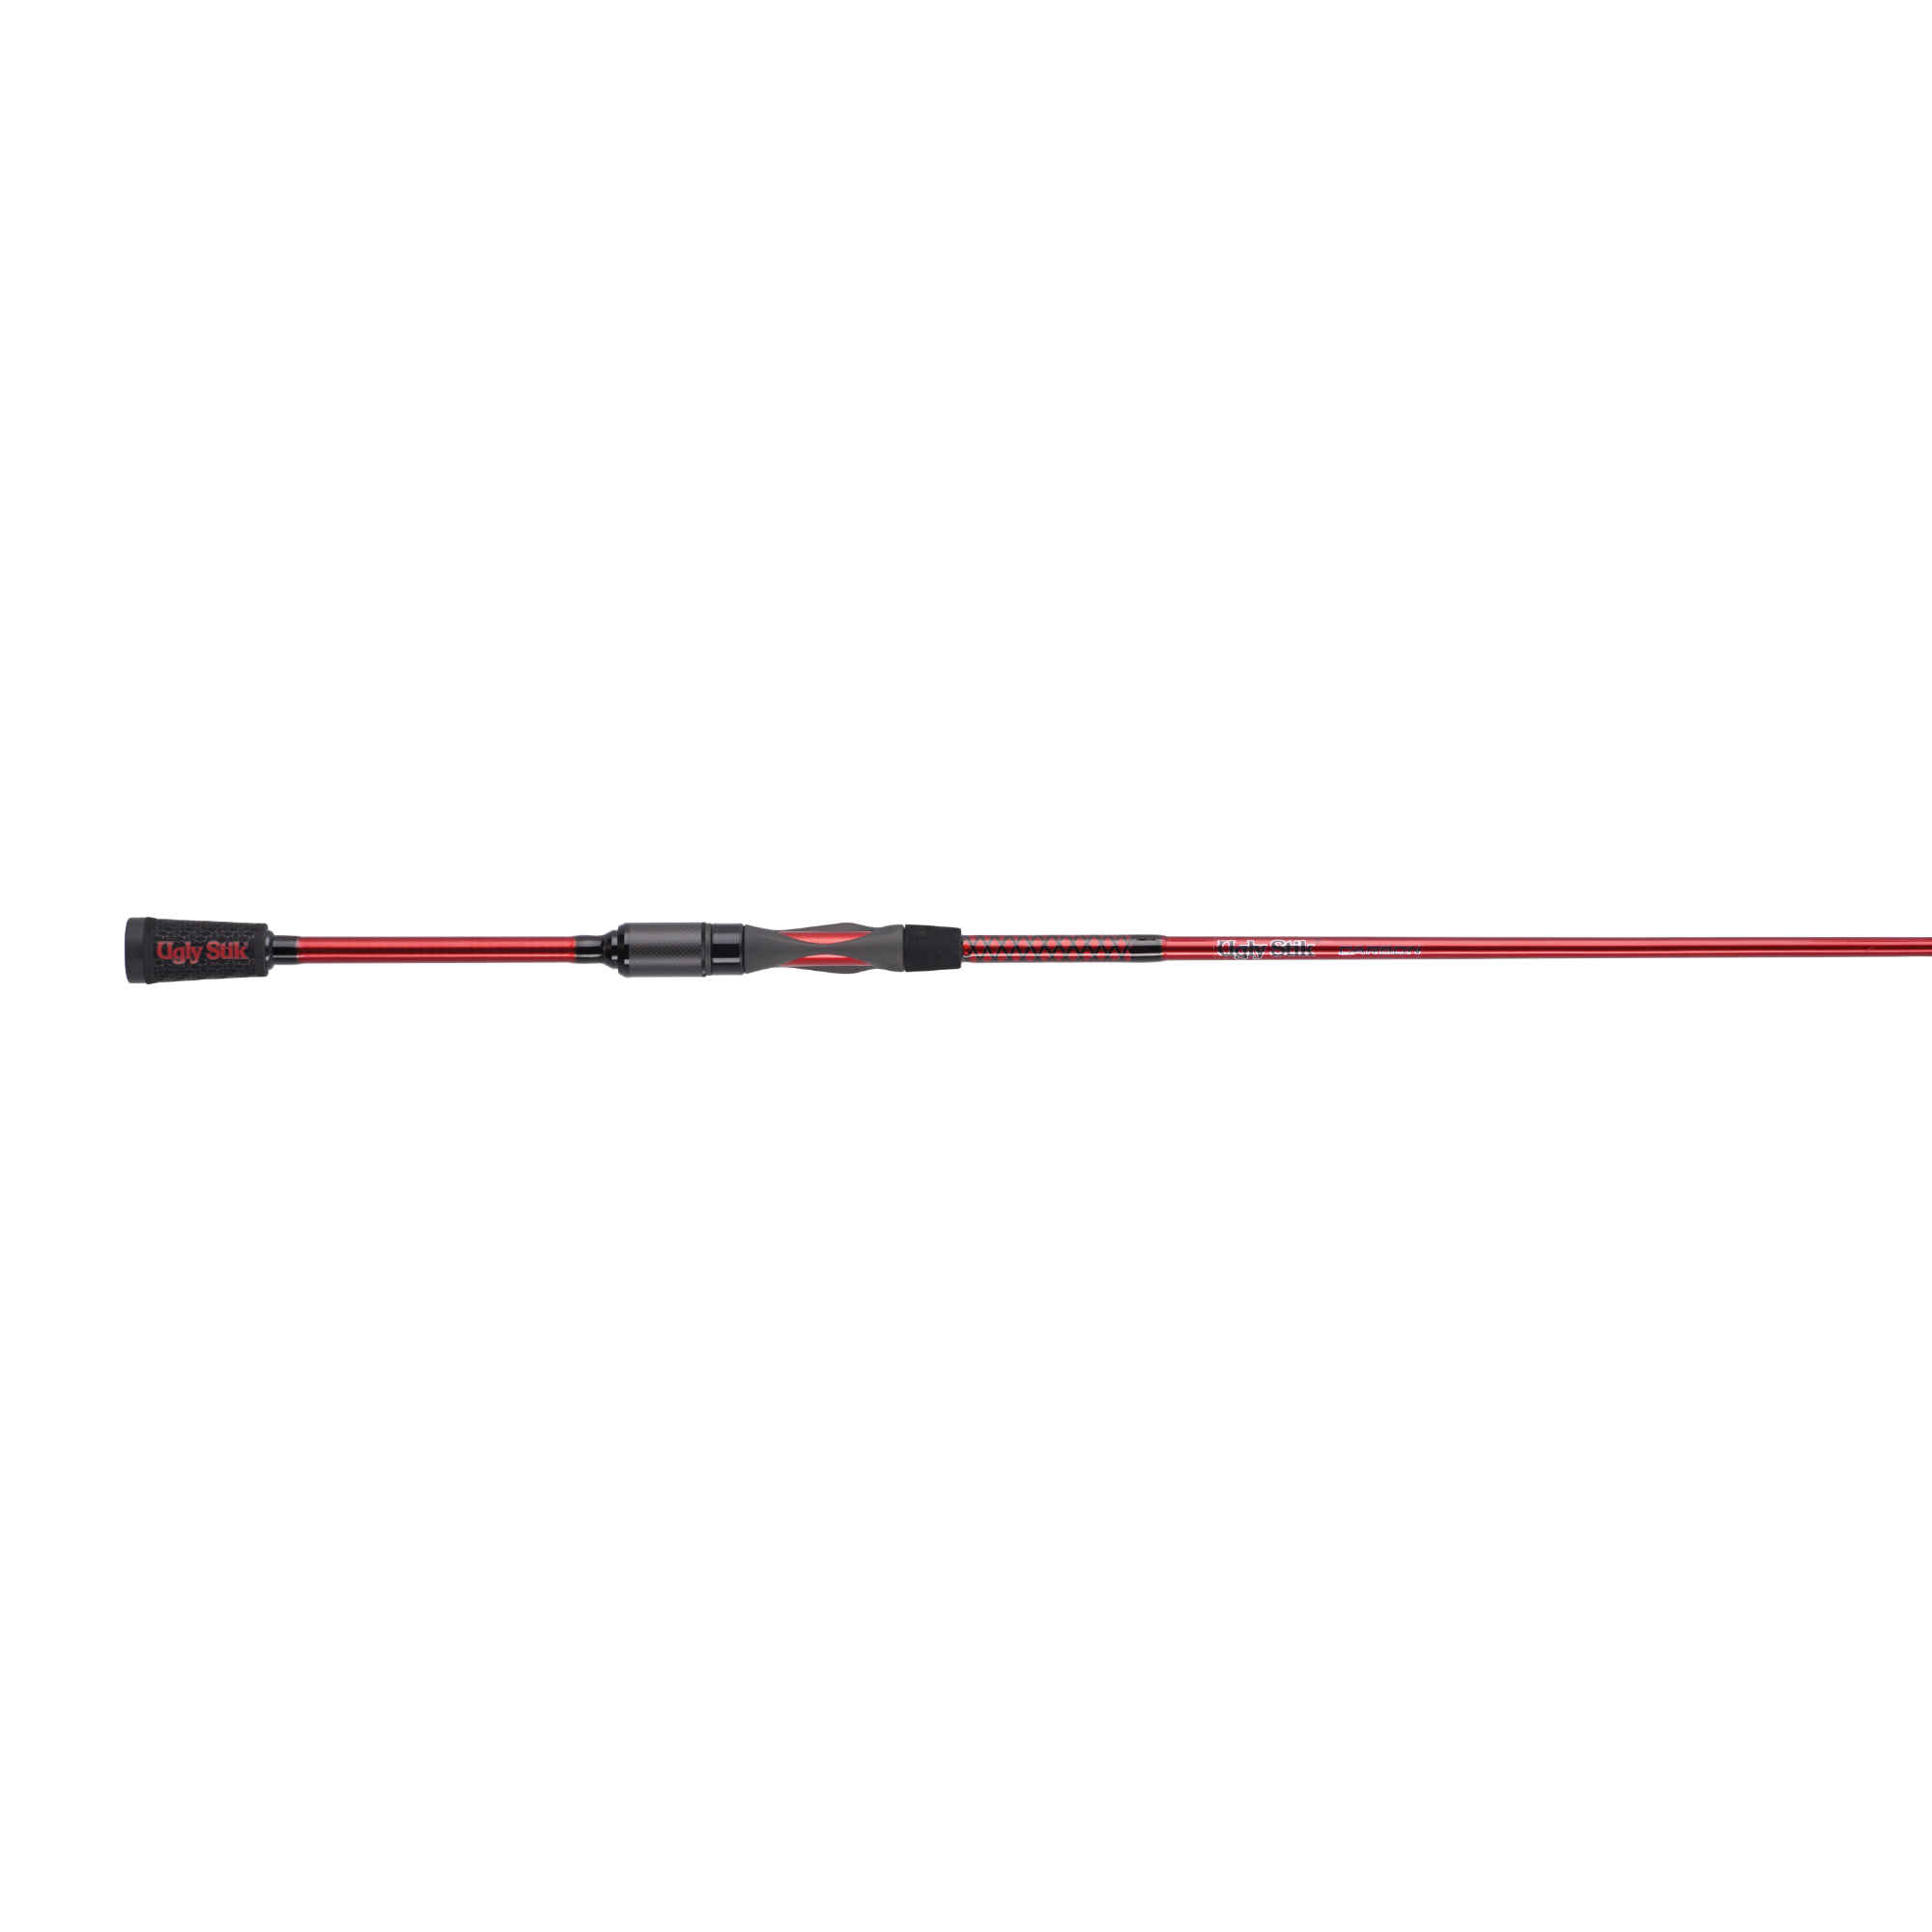 Ugly Stik Carbon Spinning Rod, 2 Piece, Light, Moderate/Fast, 7 Guides, 1 /16-1/4oz Lures USCBSP562L with Free S&H — CampSaver